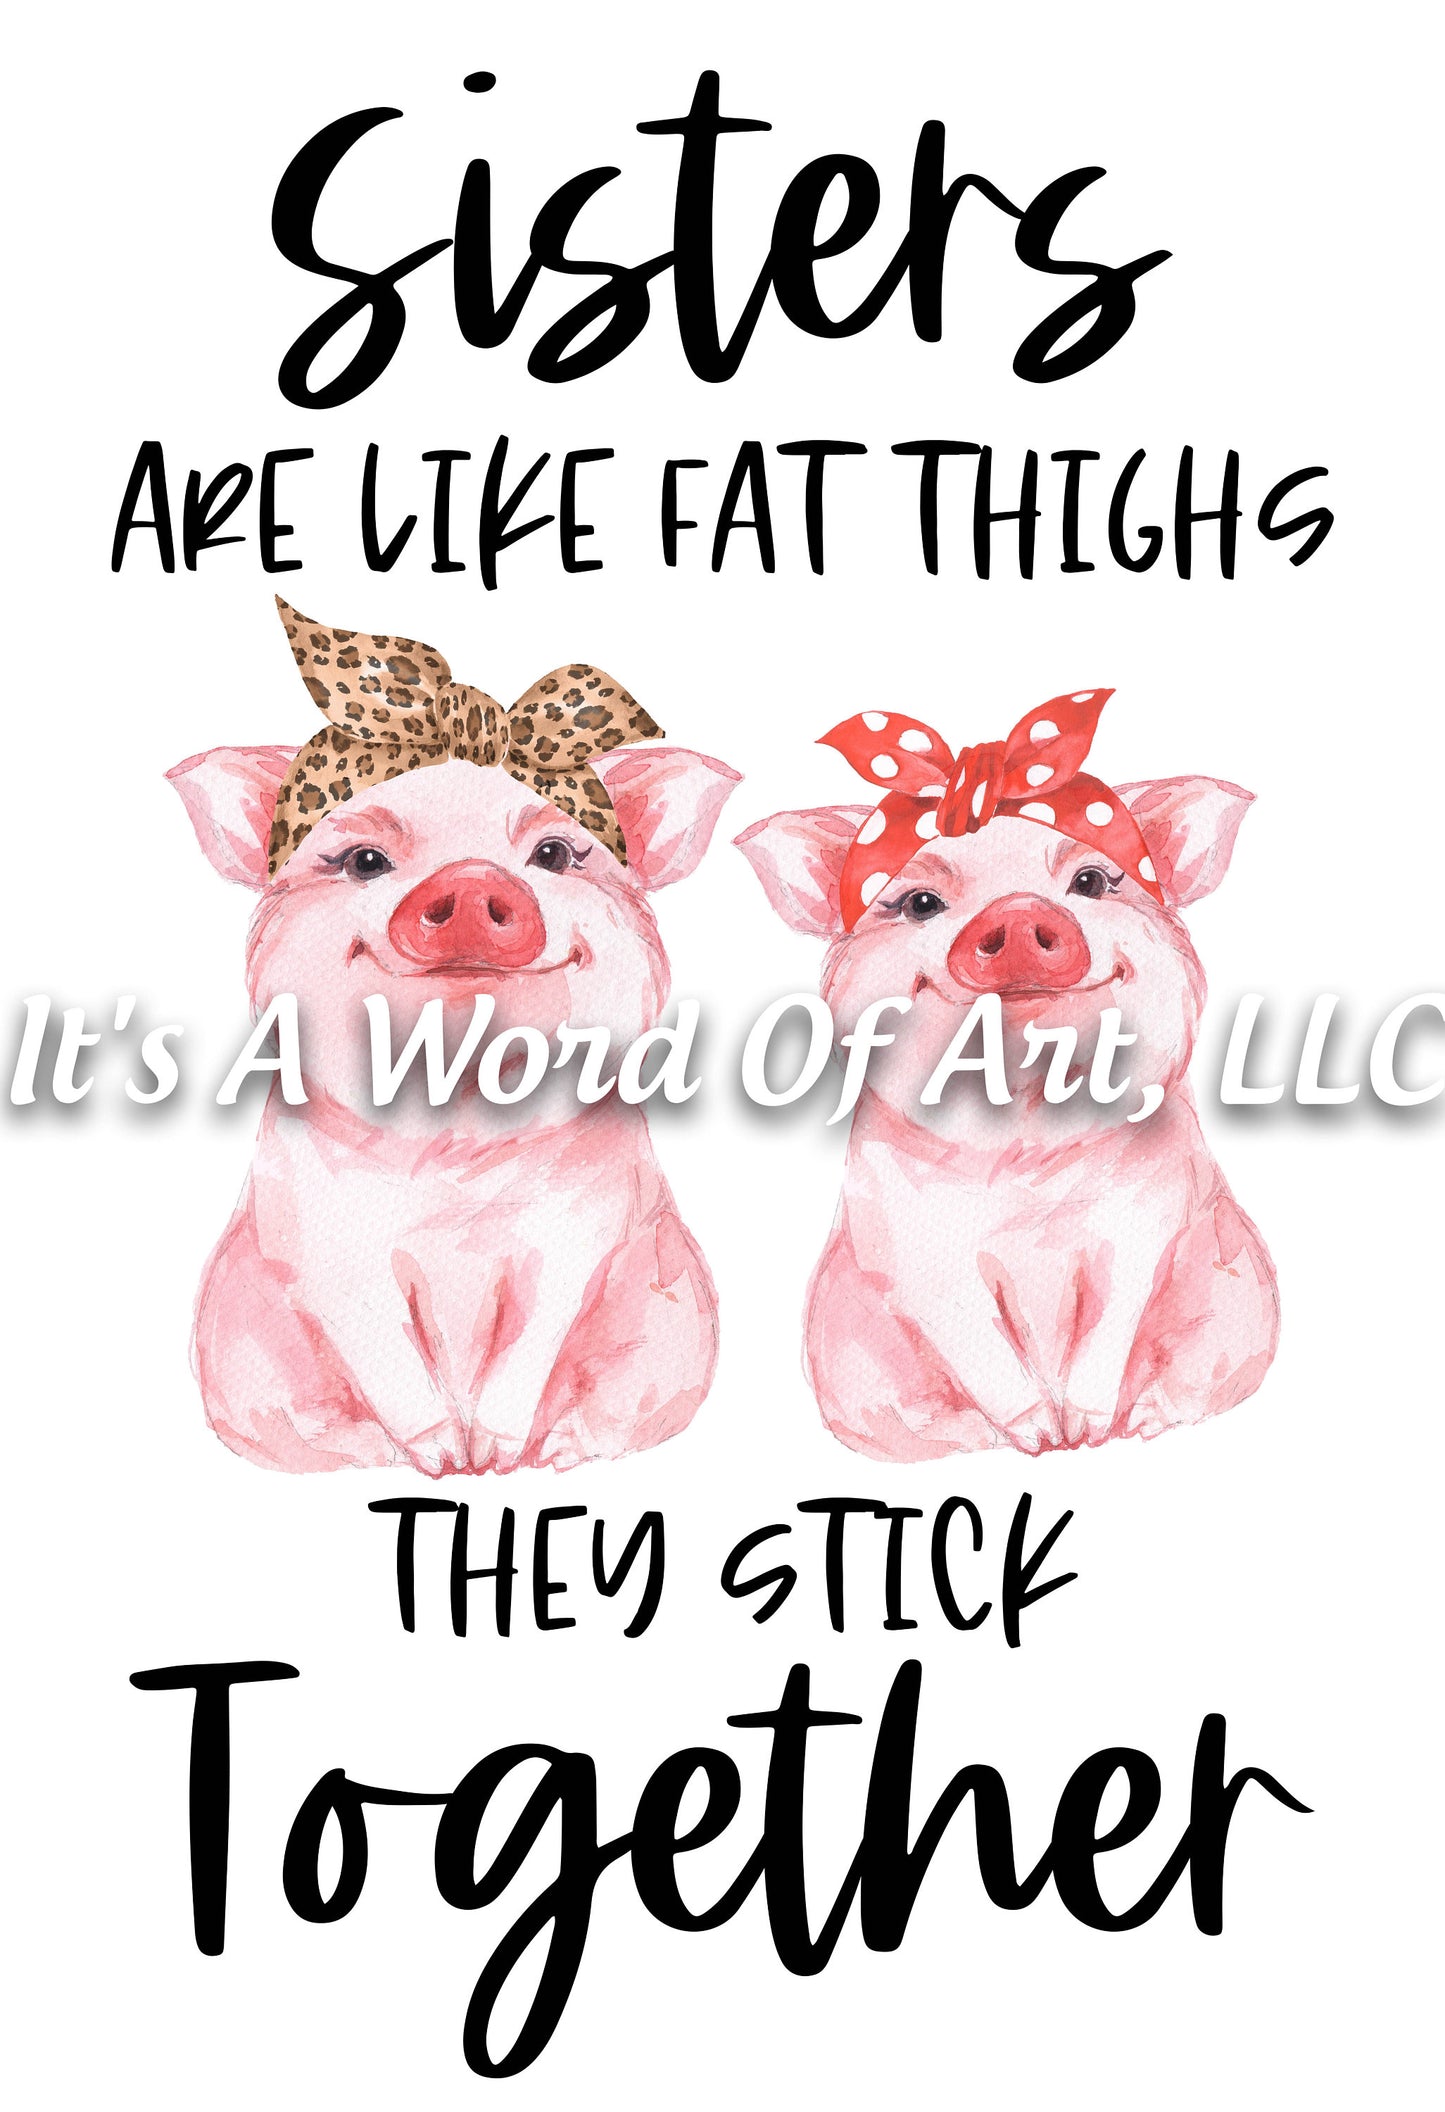 Animals 57- Sisters are like Fat Thighs They Stick Together Cute Funny TShirt - Sublimation Transfer Set/Ready To Press Sublimation Transfer